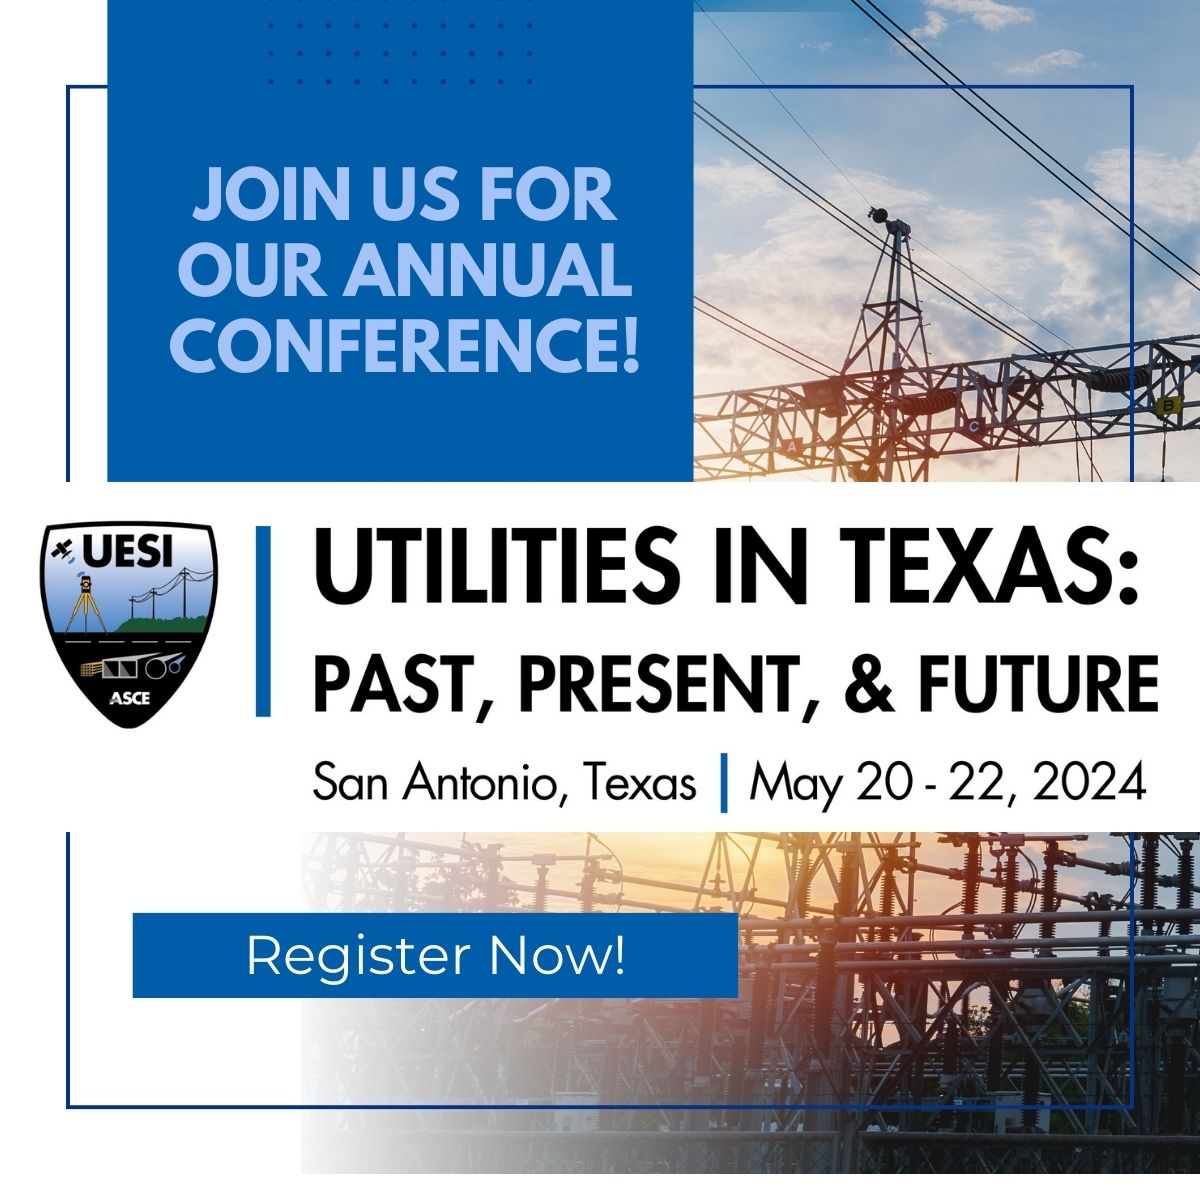 American Society of Civil Engineers - Utility Engineering and Surveying Institute Texas Section 5th Annual Conference